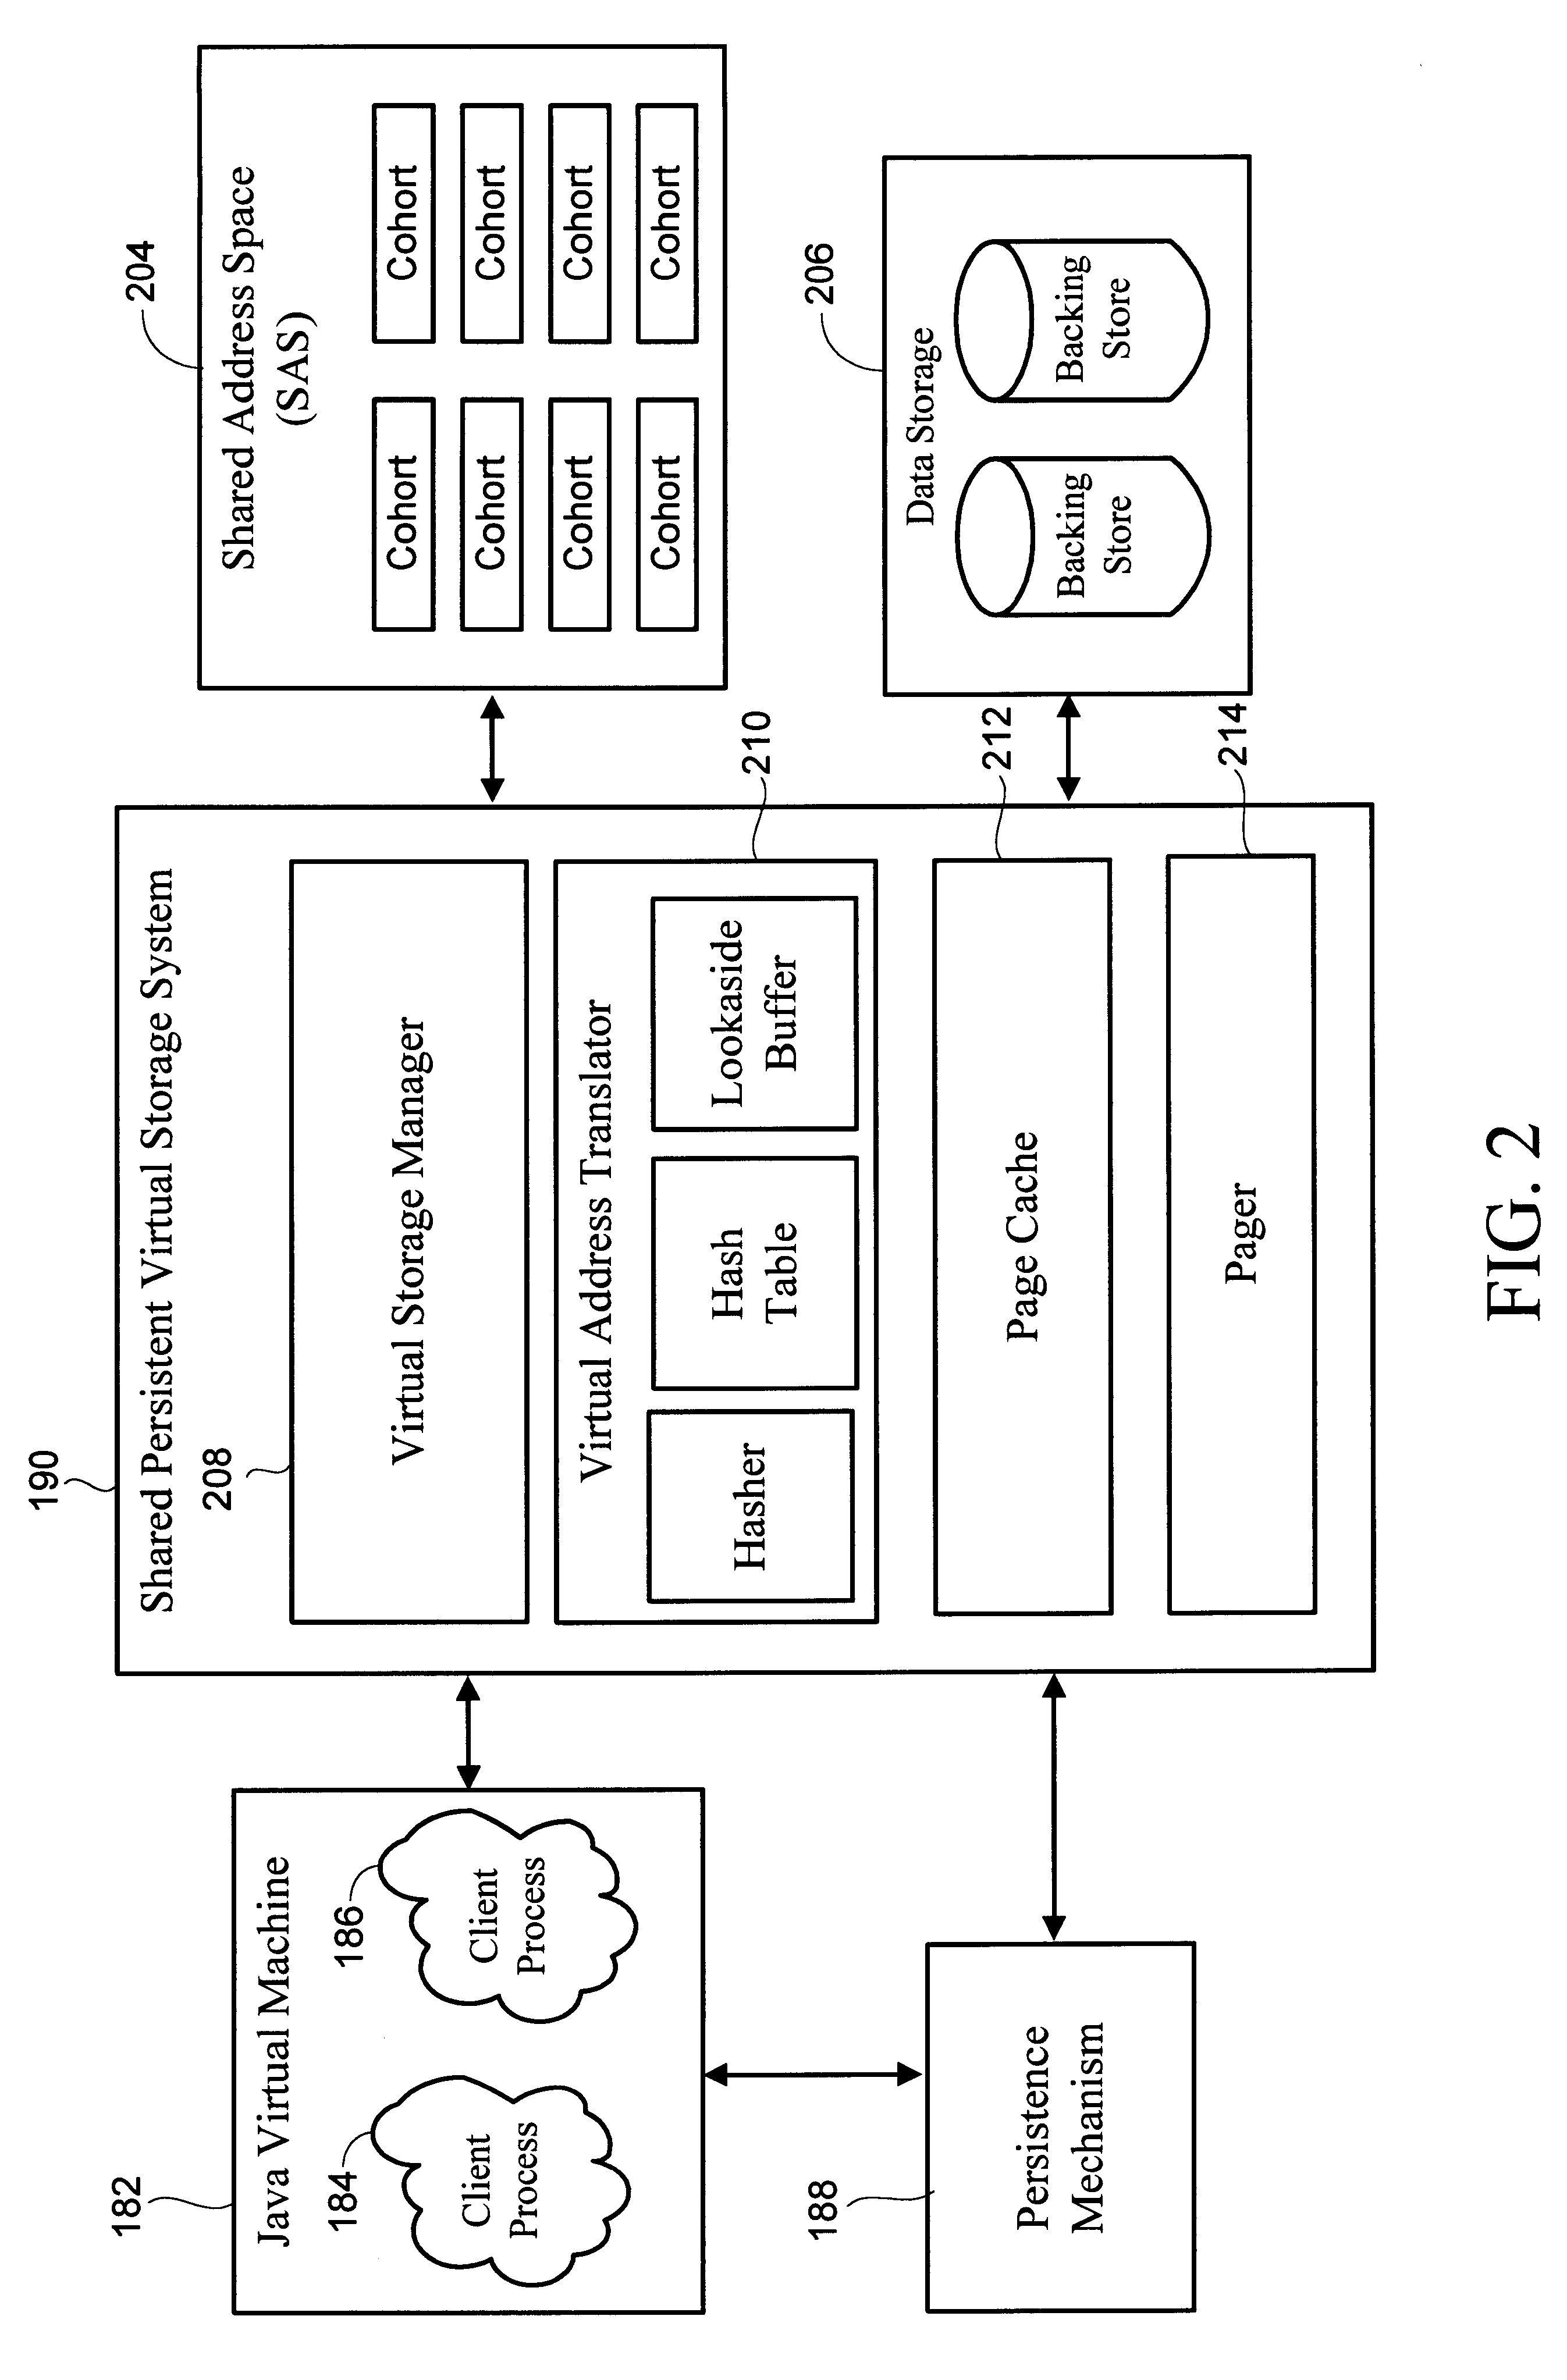 System and method for storage of shared persistent objects